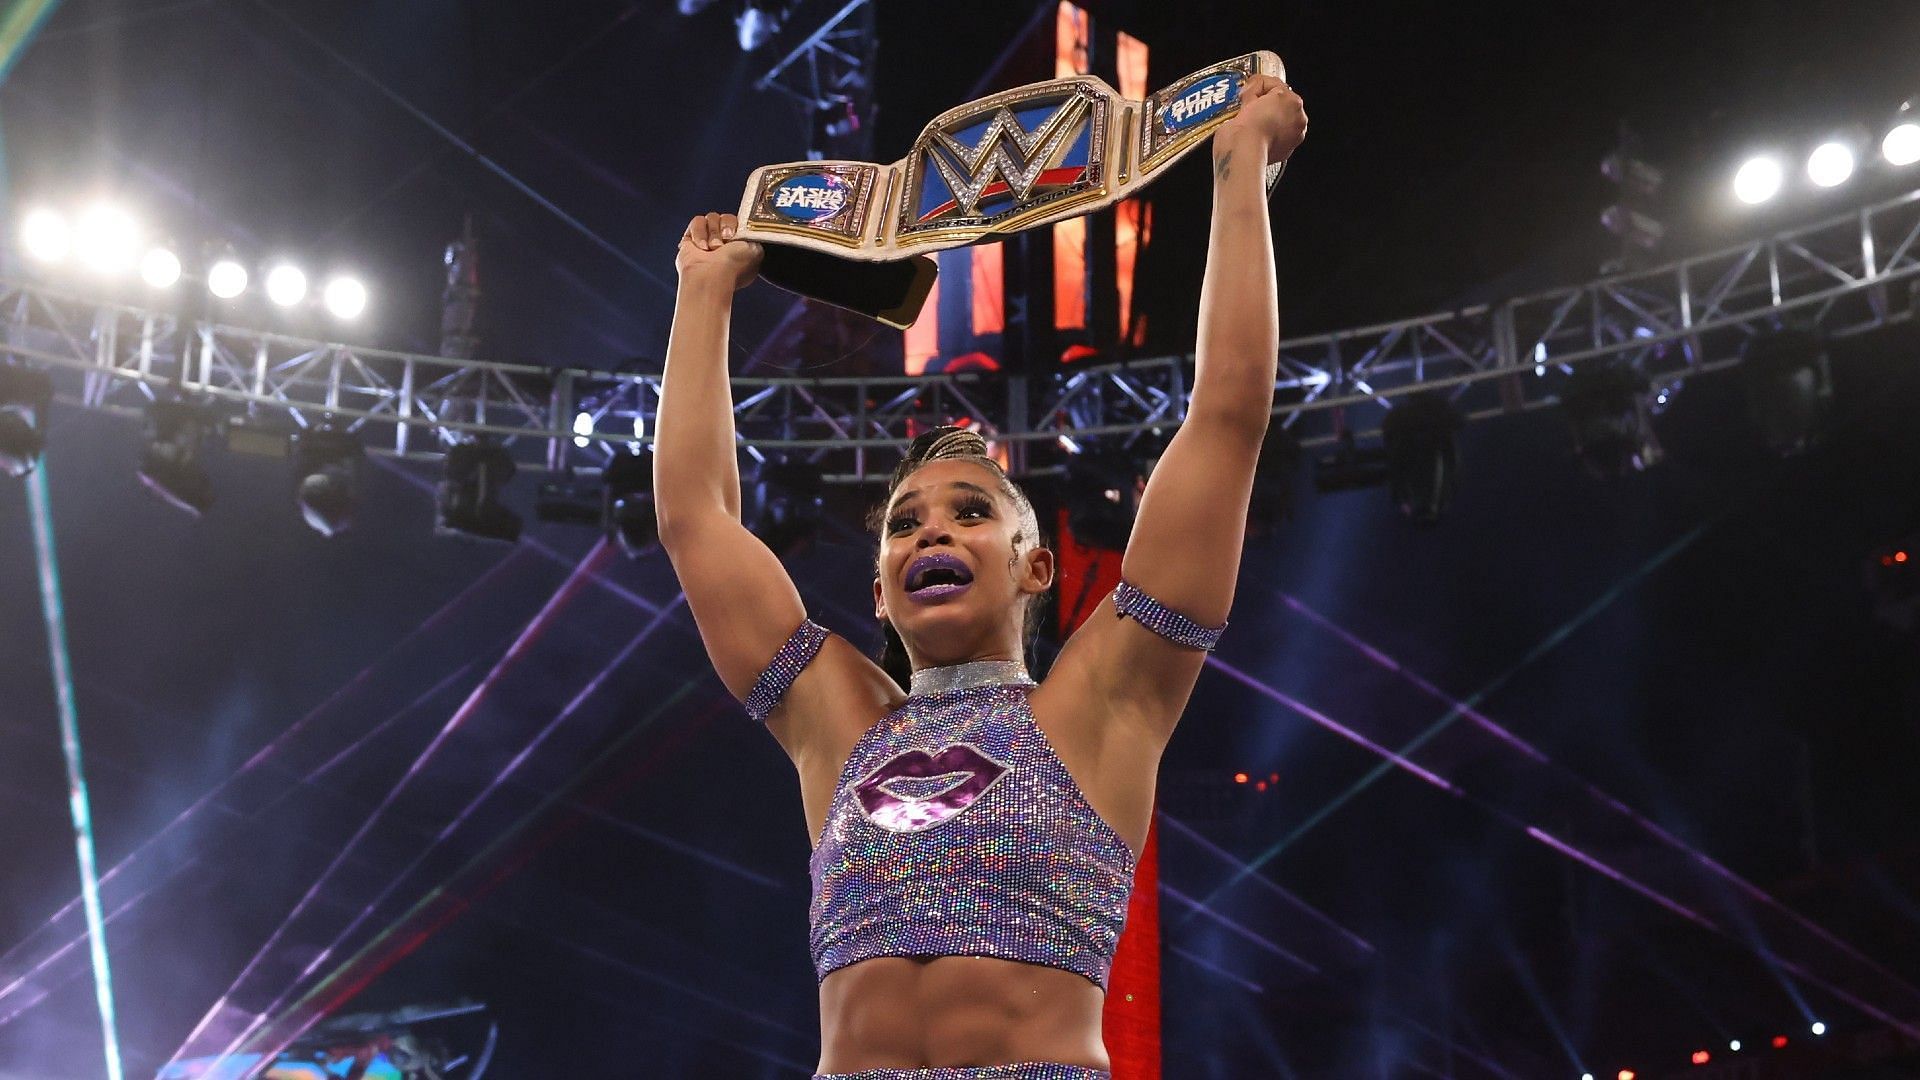 Bianca Belair wants to win gold at Wrestlemania once more.